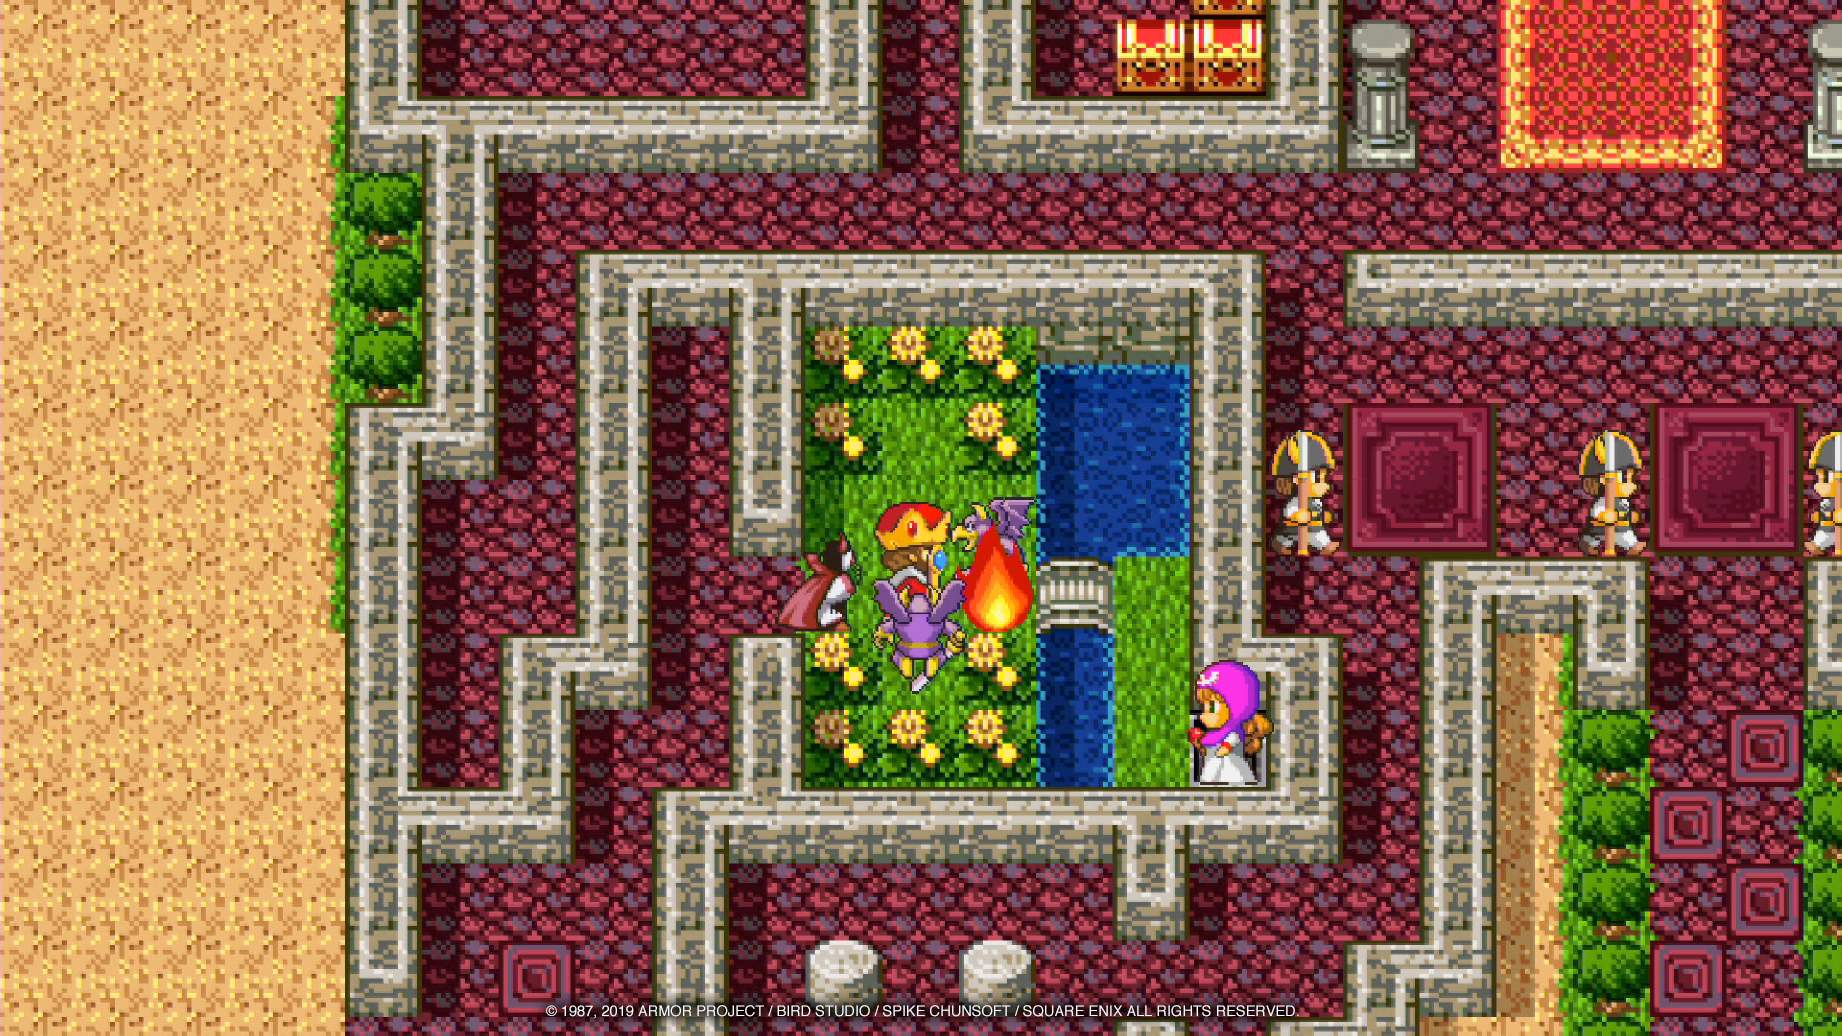 The king is attacked by monsters in the castle